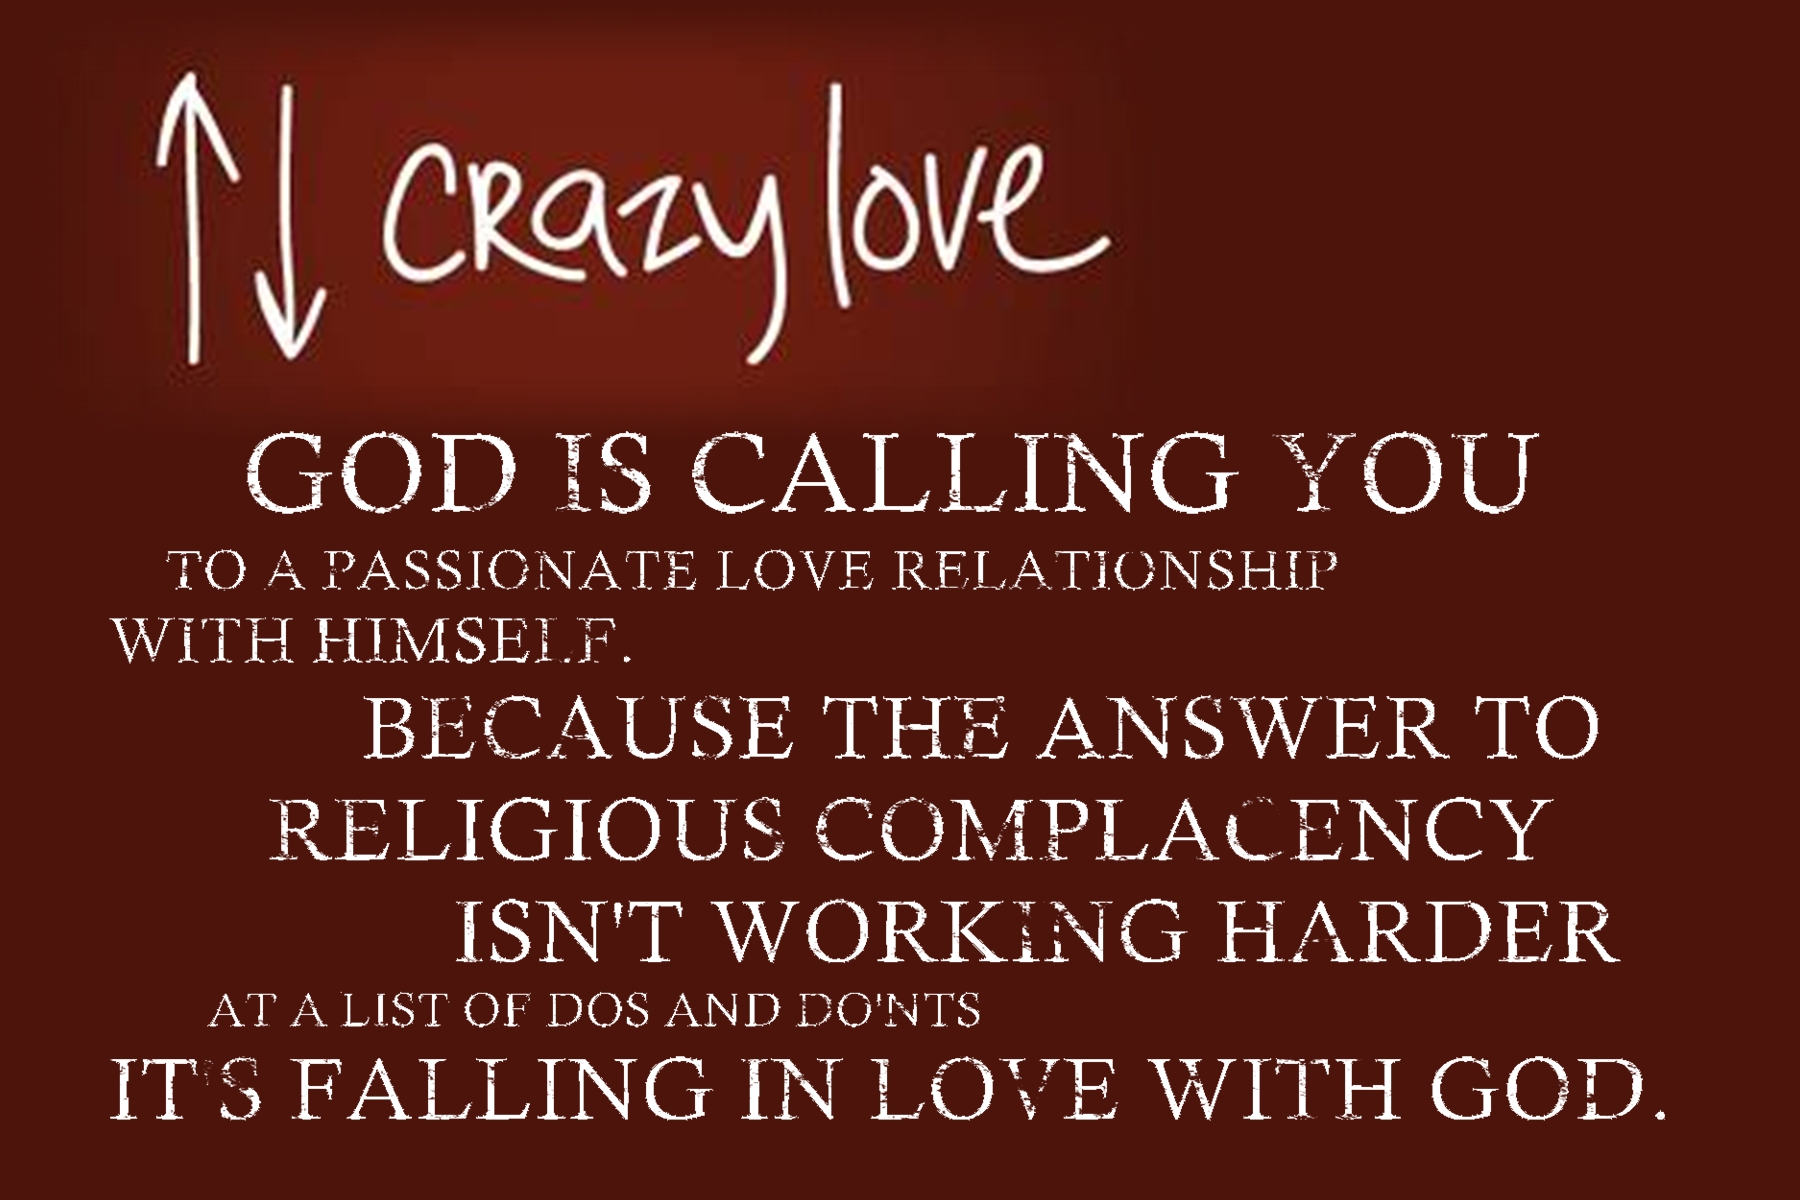 Francis Chan Crazy  Love  Quotes  QuotesGram